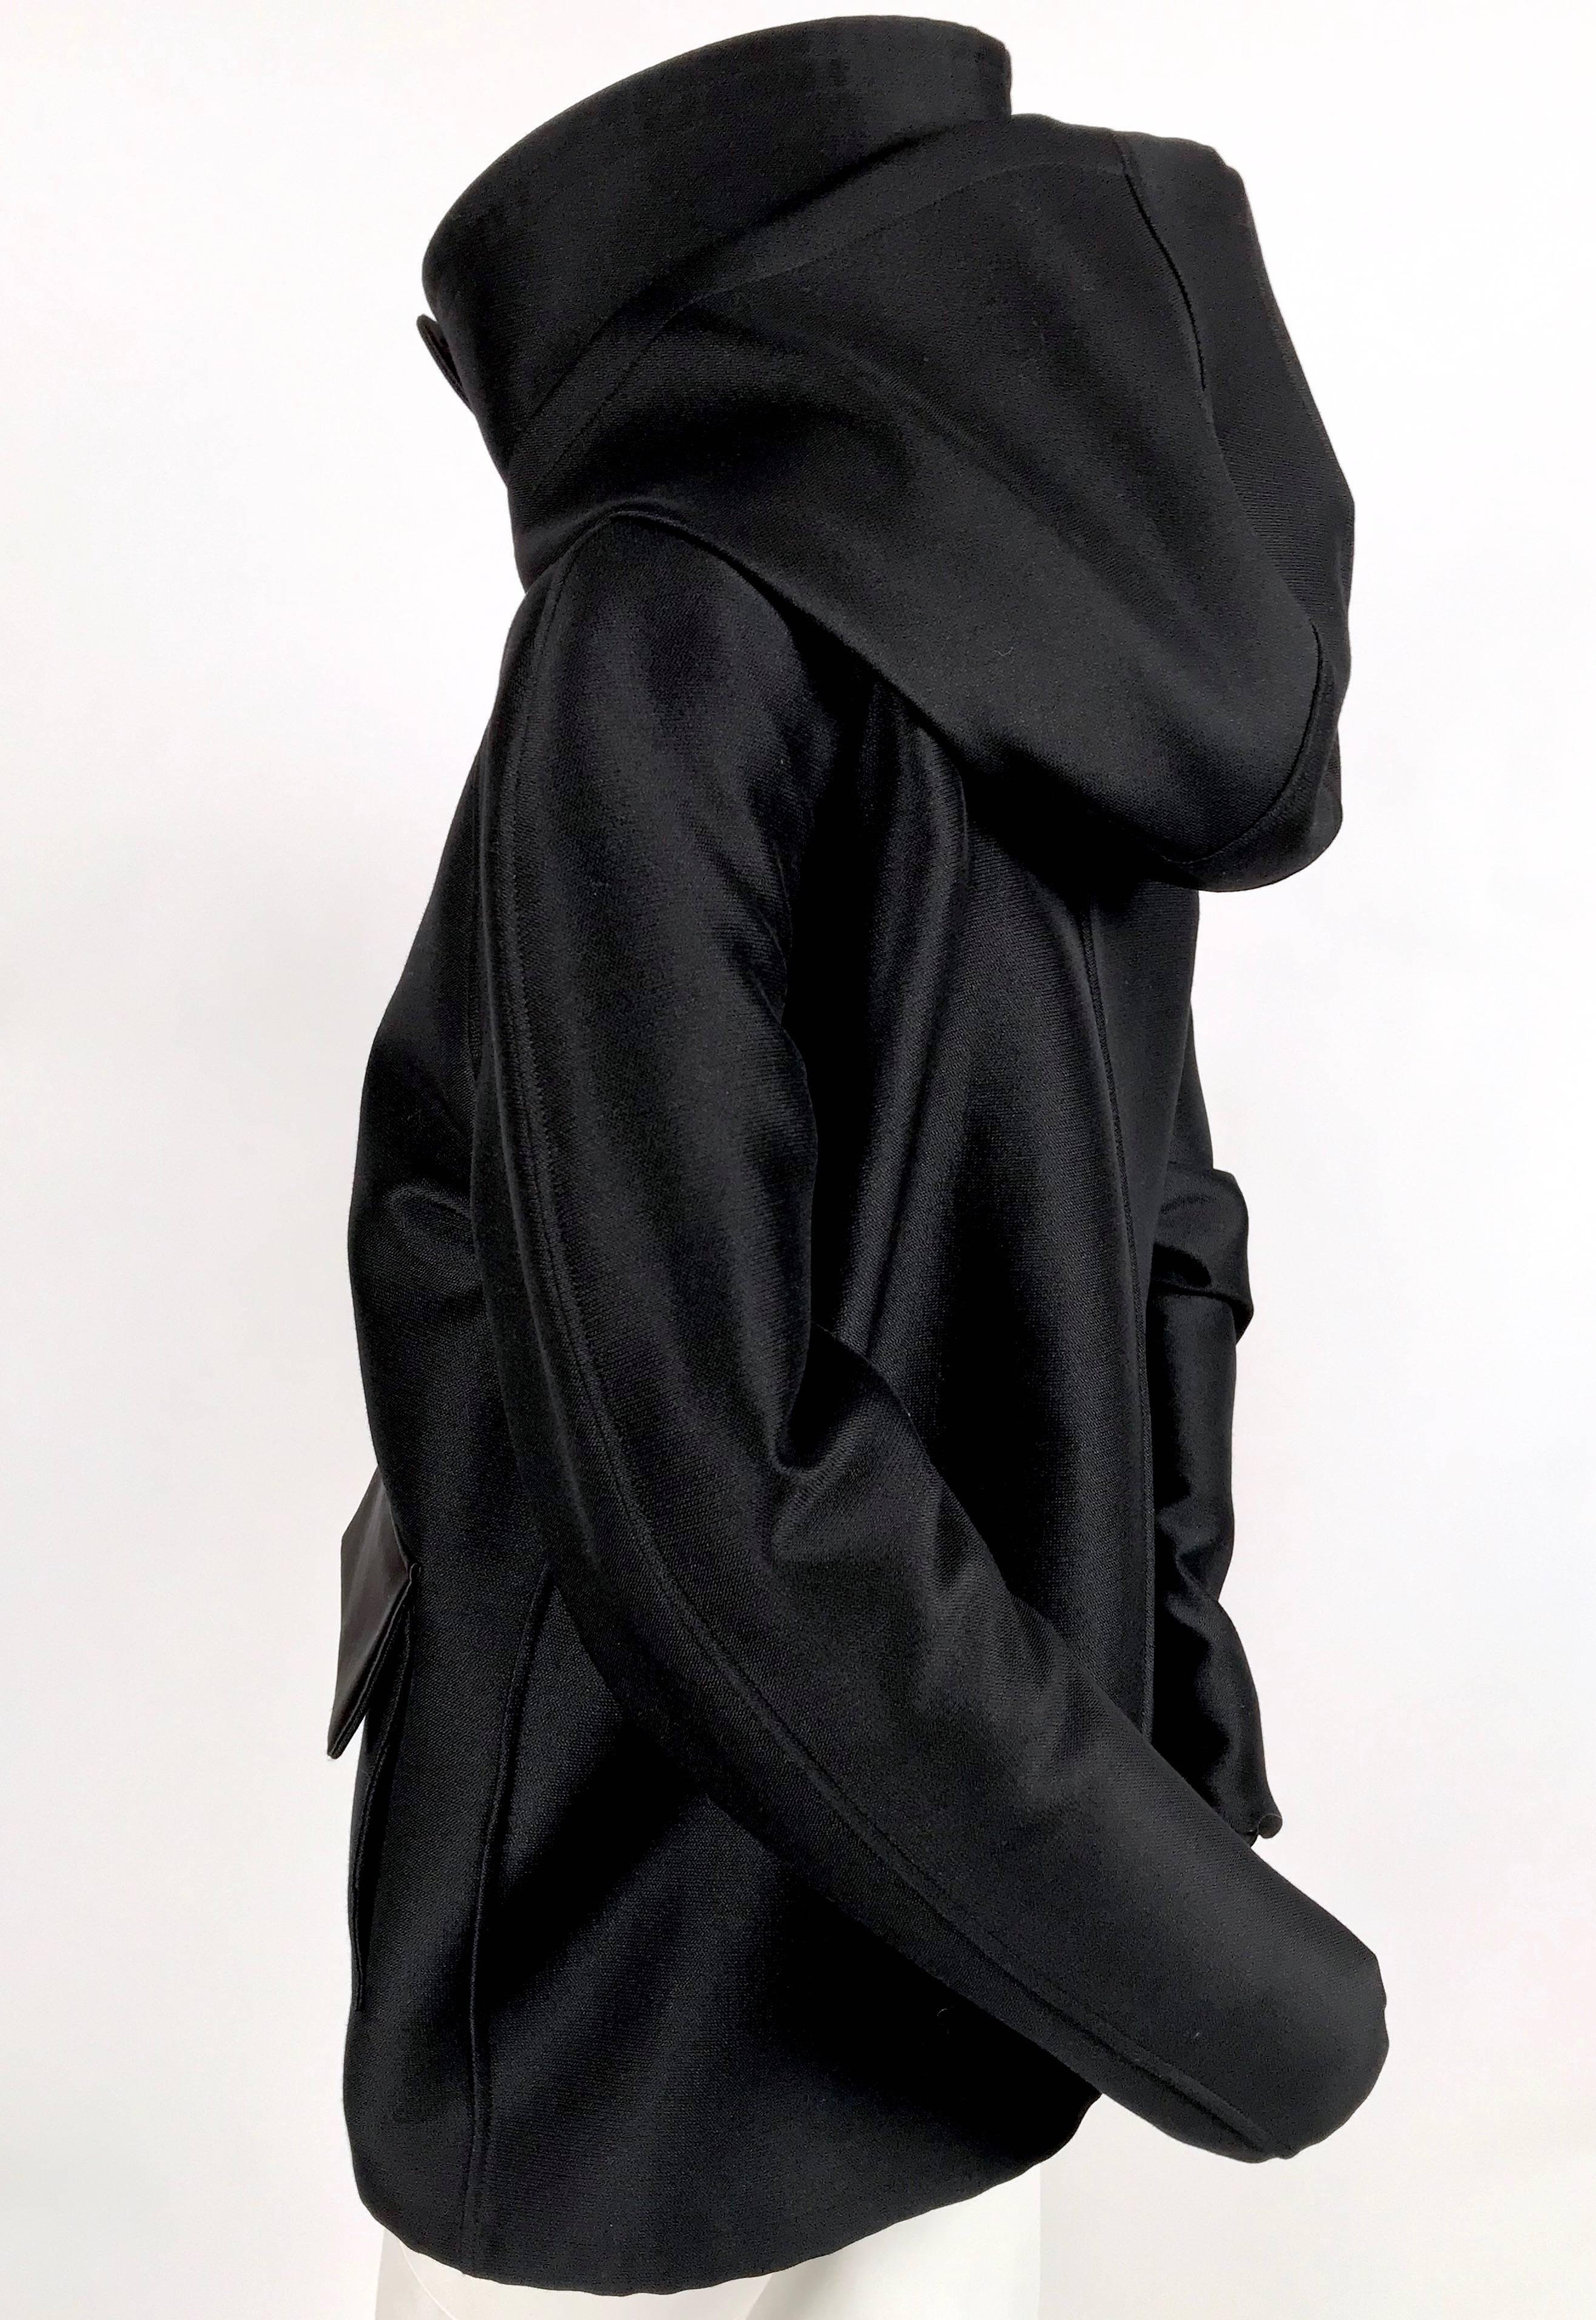 Jet black jacket with hood and satin accents designed by Phoebe Philo for Celine as seen in the pre-fall collection of 2015. French size 38. Approximate measurements: bust 42